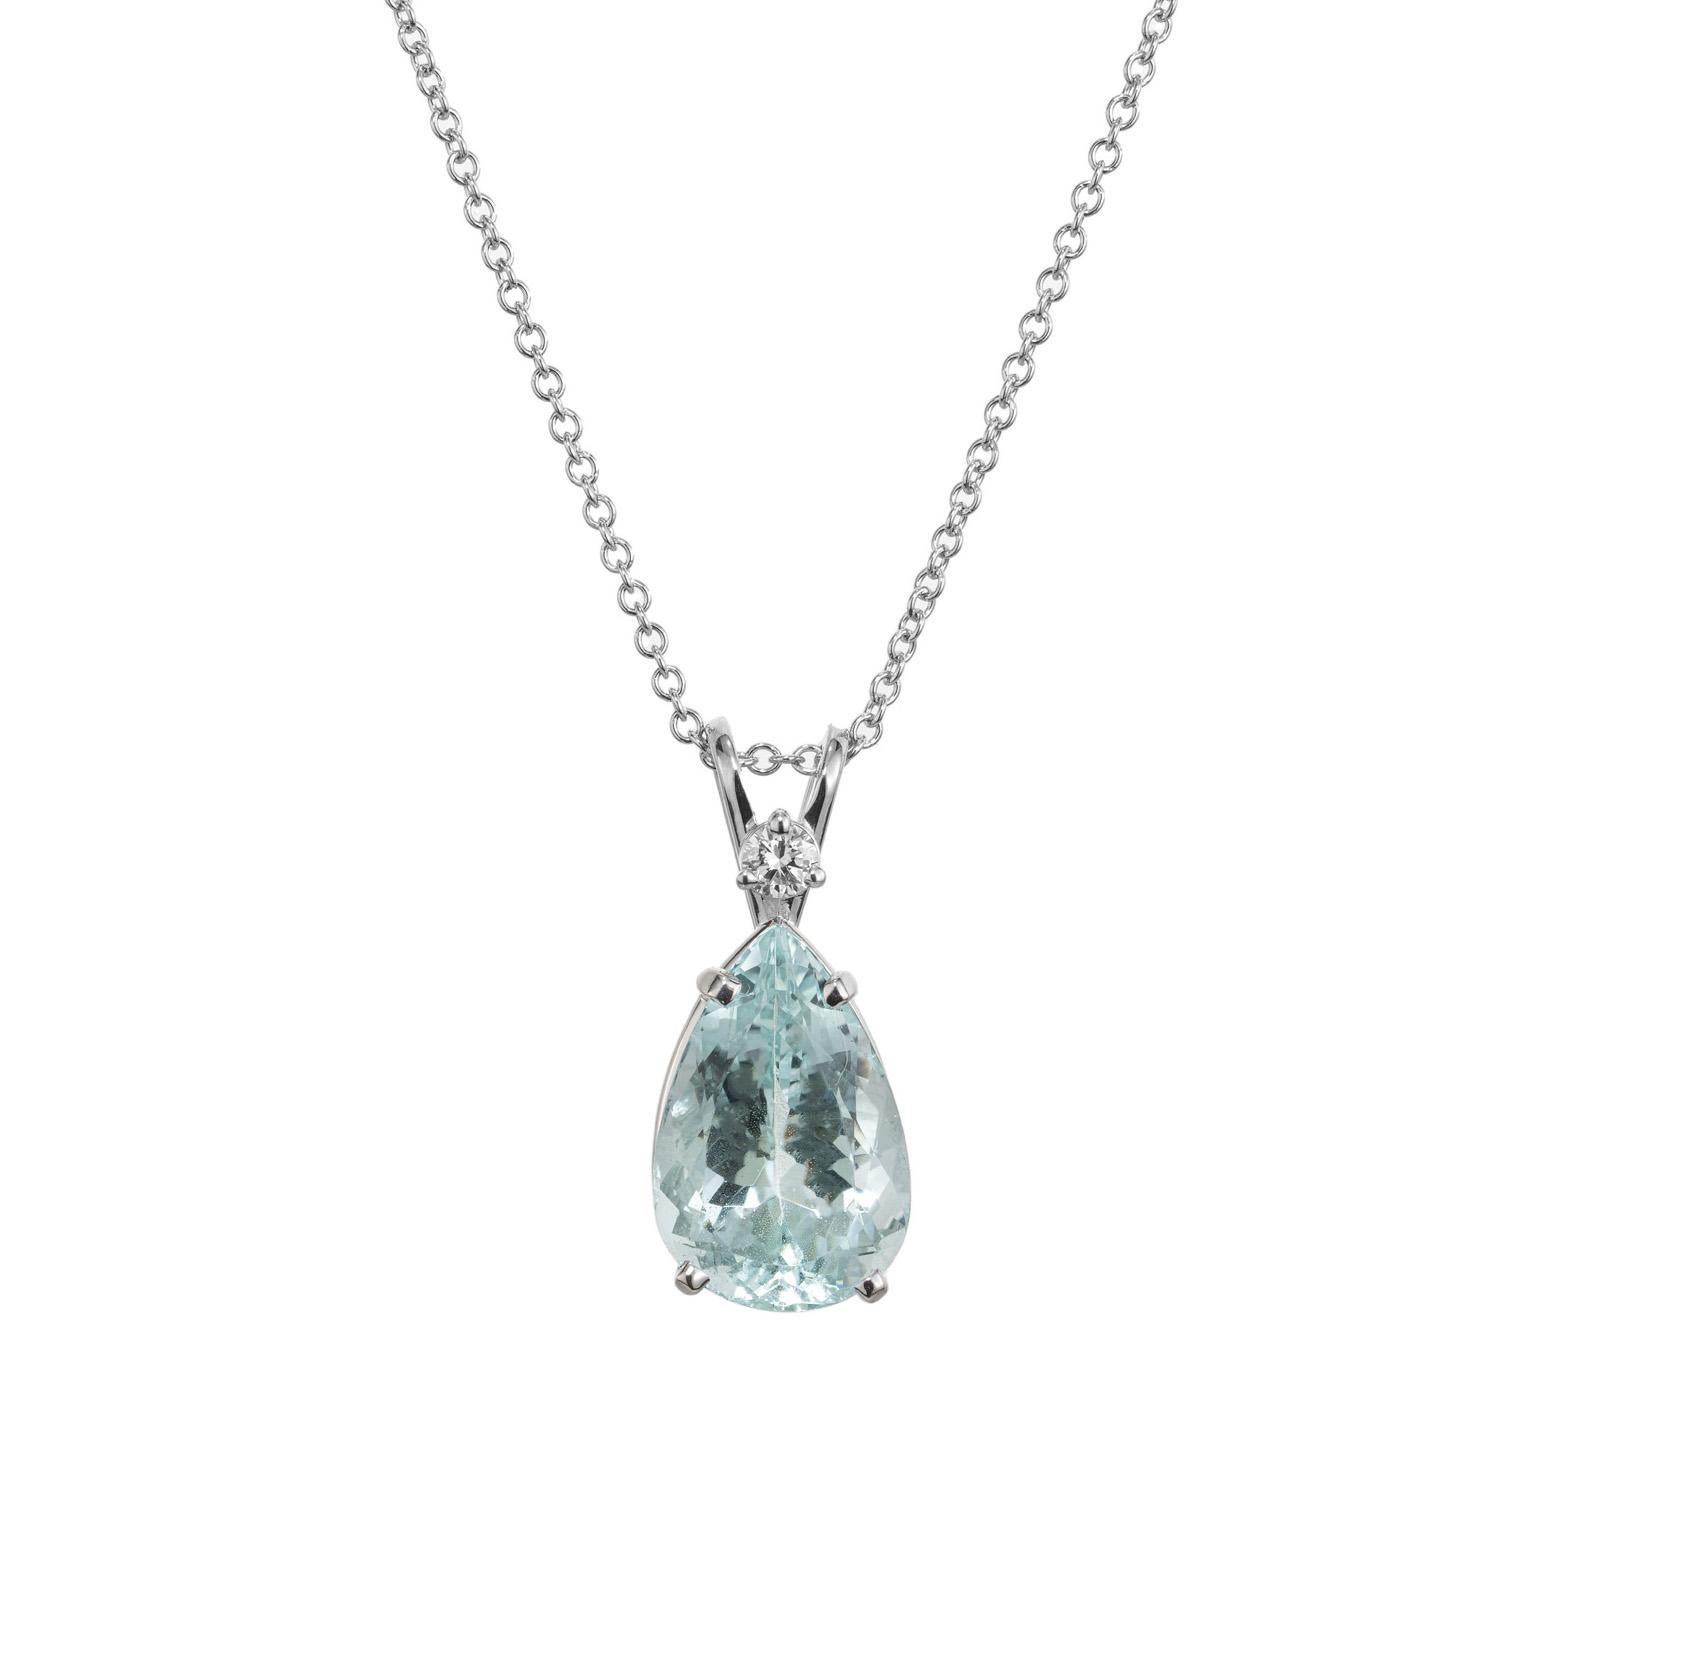 Peter Suchy 5.31 carat aquamarine and diamond pendant necklace. At the center of this necklace is a 5.31crt pear shaped aqua that is set in 14k white gold and accented with a round brilliant cut diamond. The aqua is a beautiful icy soft blue hue. A